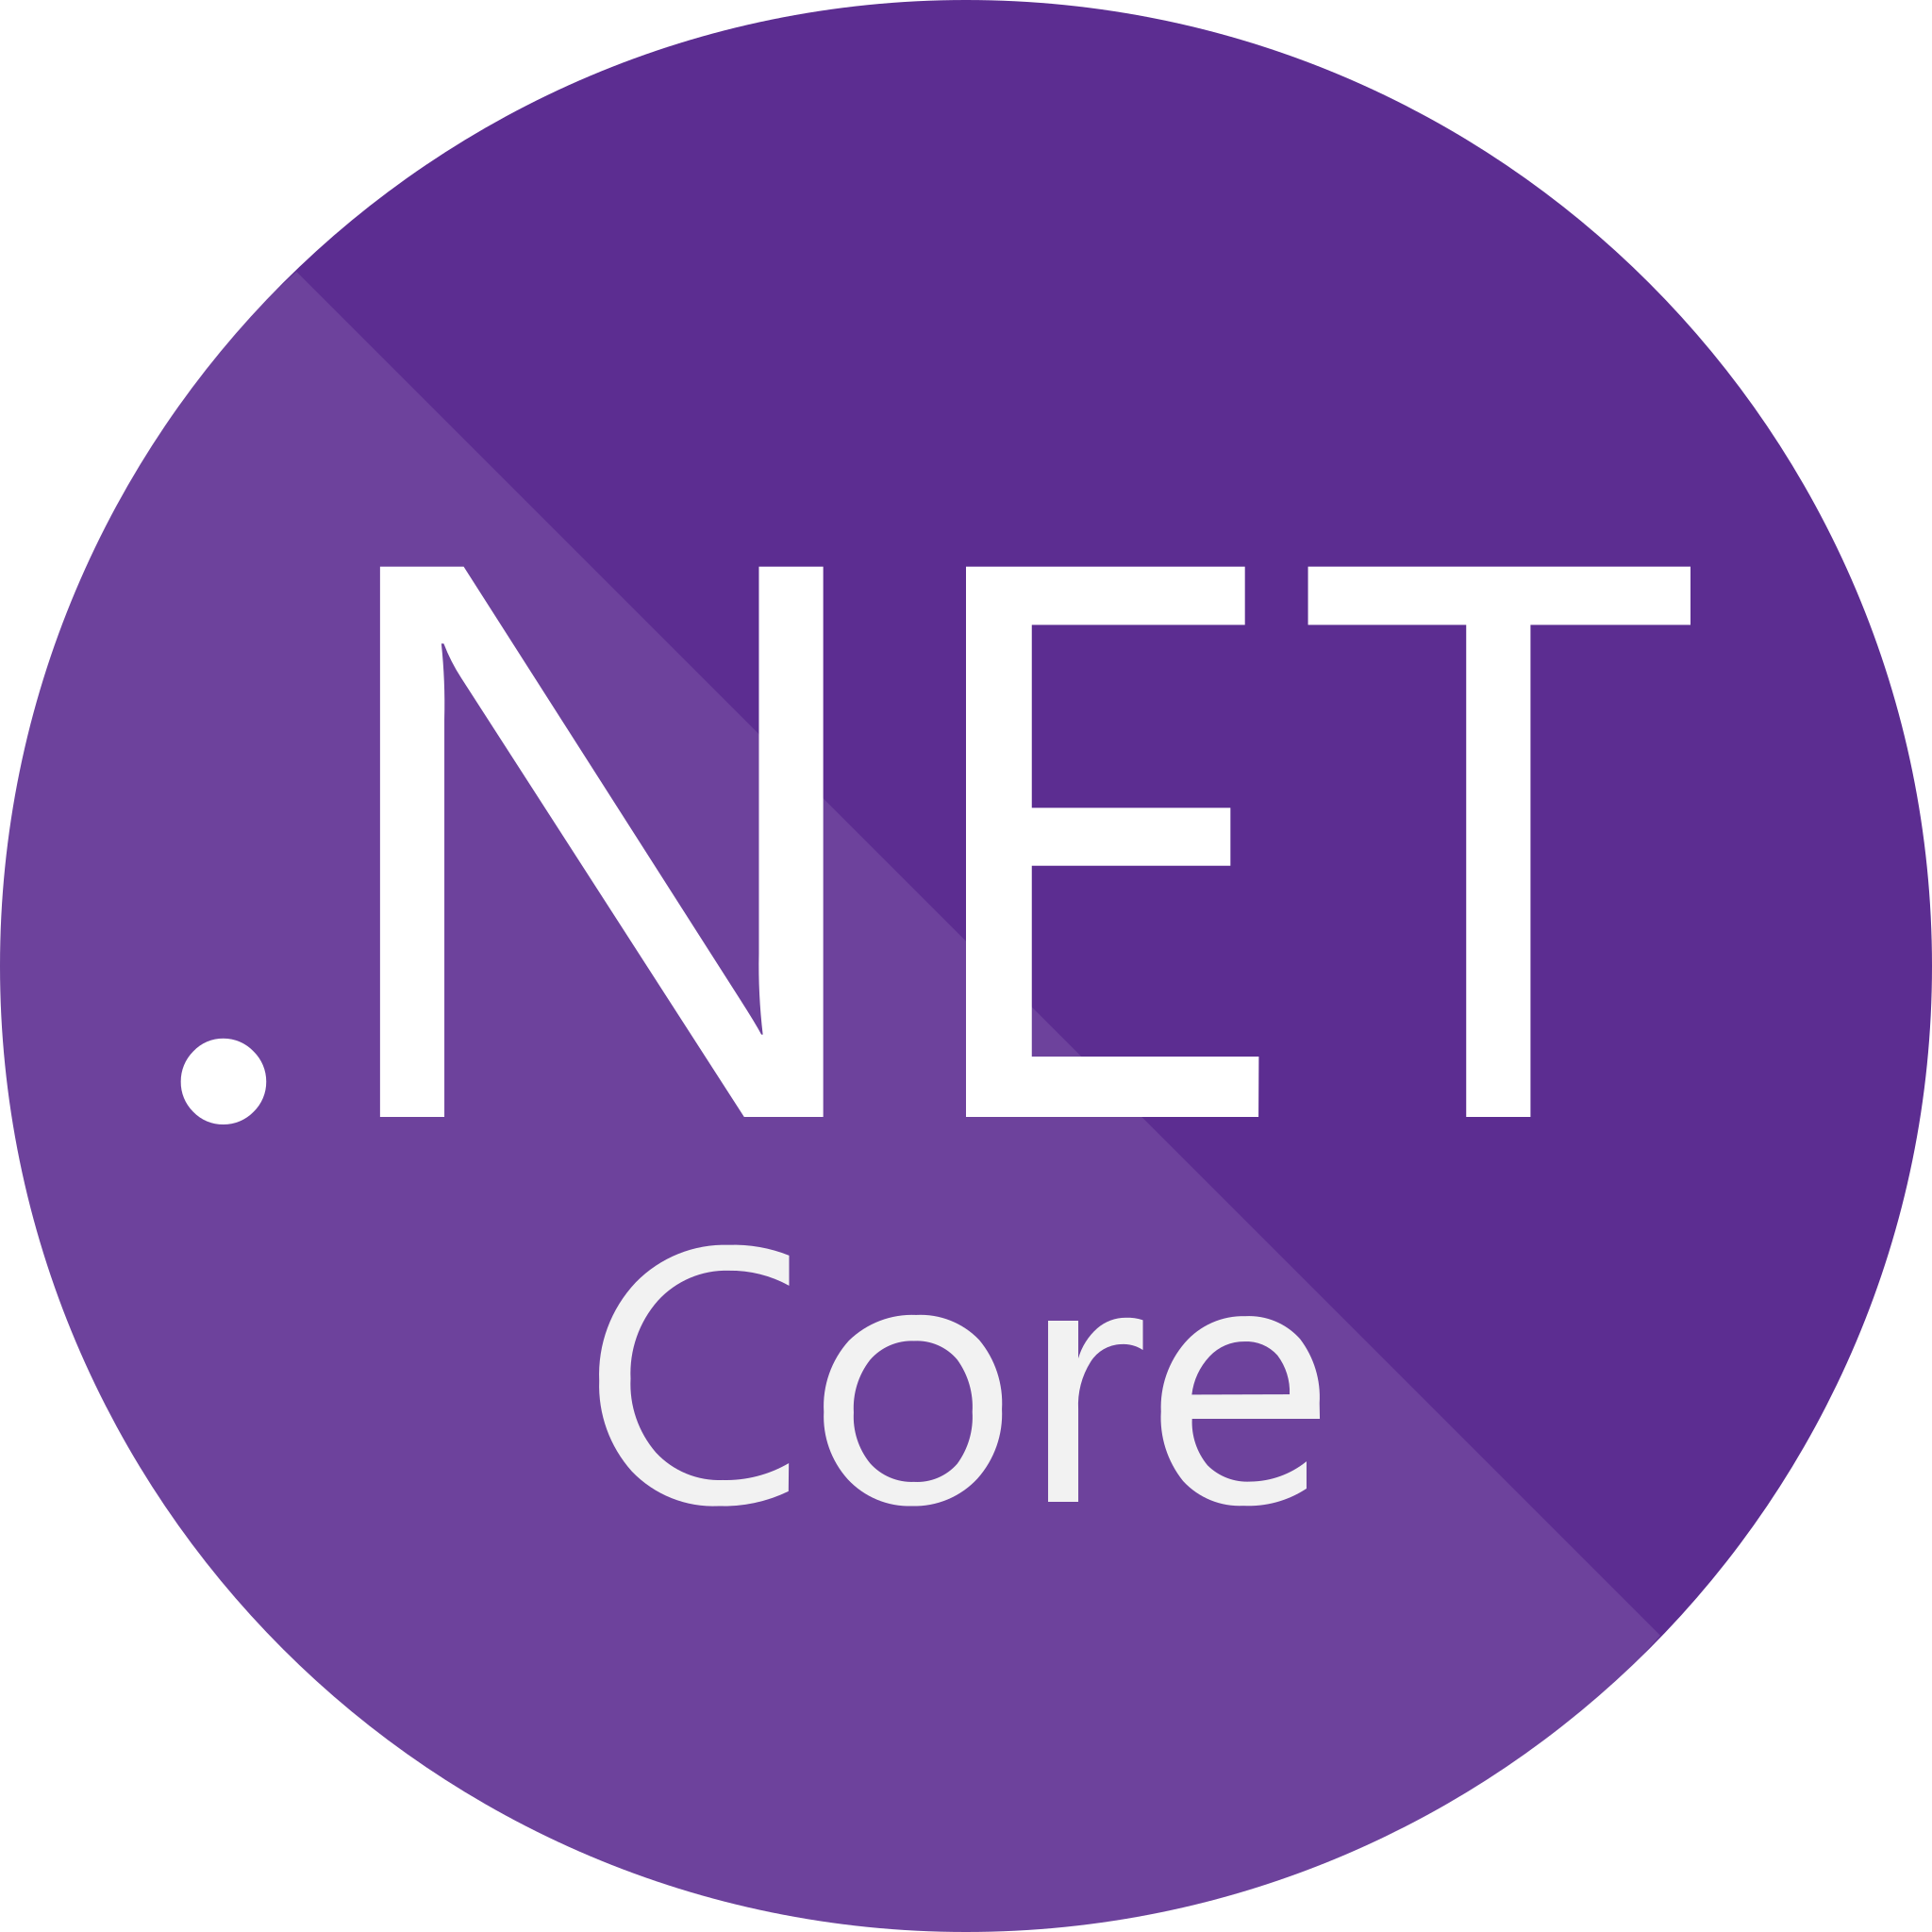 Overview of .NET core